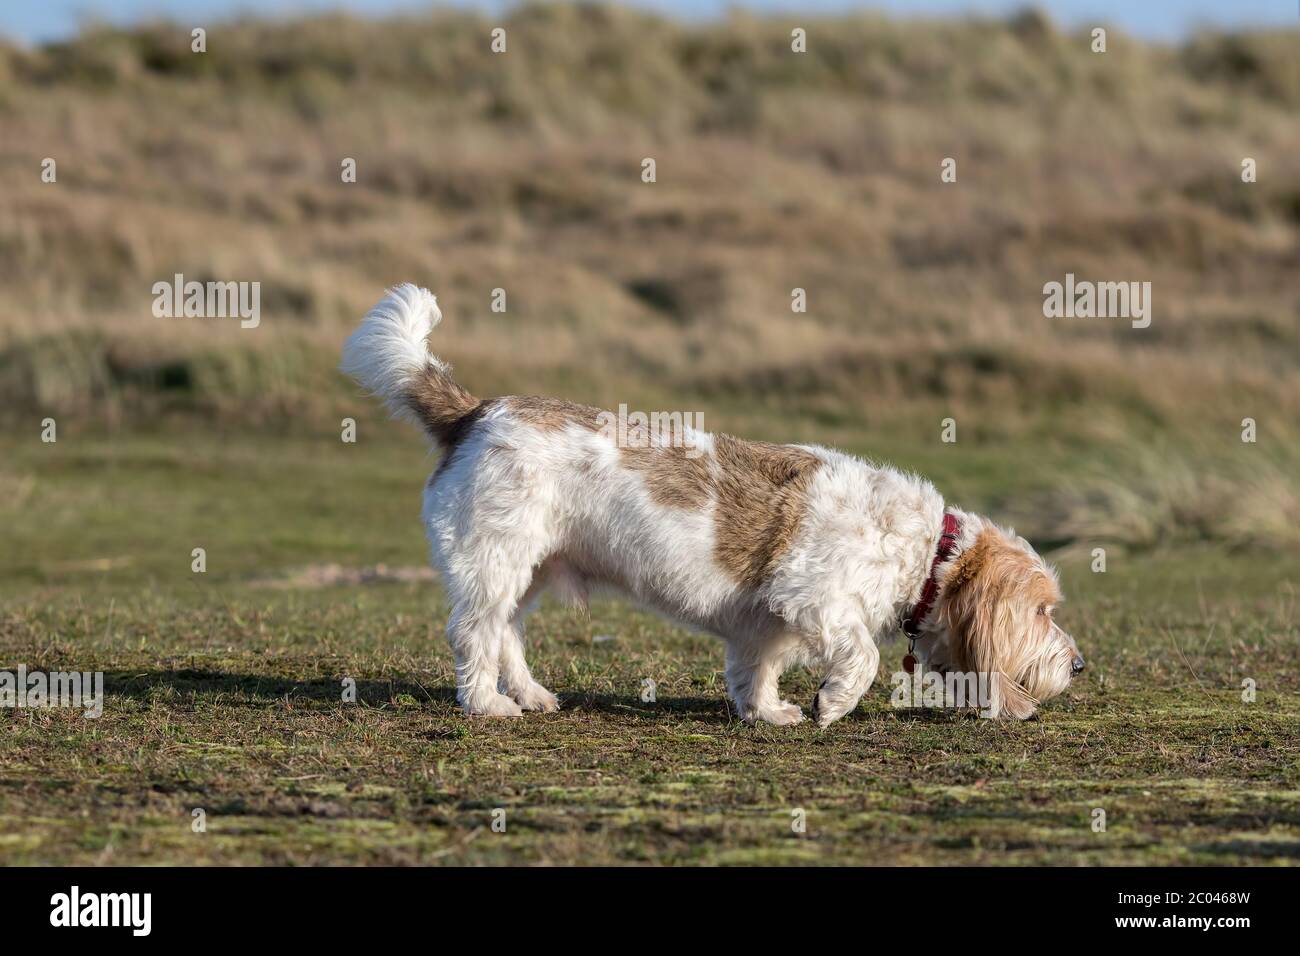 Grand Basset Griffon Vendeen. French basset hound dog smelling the grass. Full length profile picture of this pedigree dog sniffing the ground in prey Stock Photo